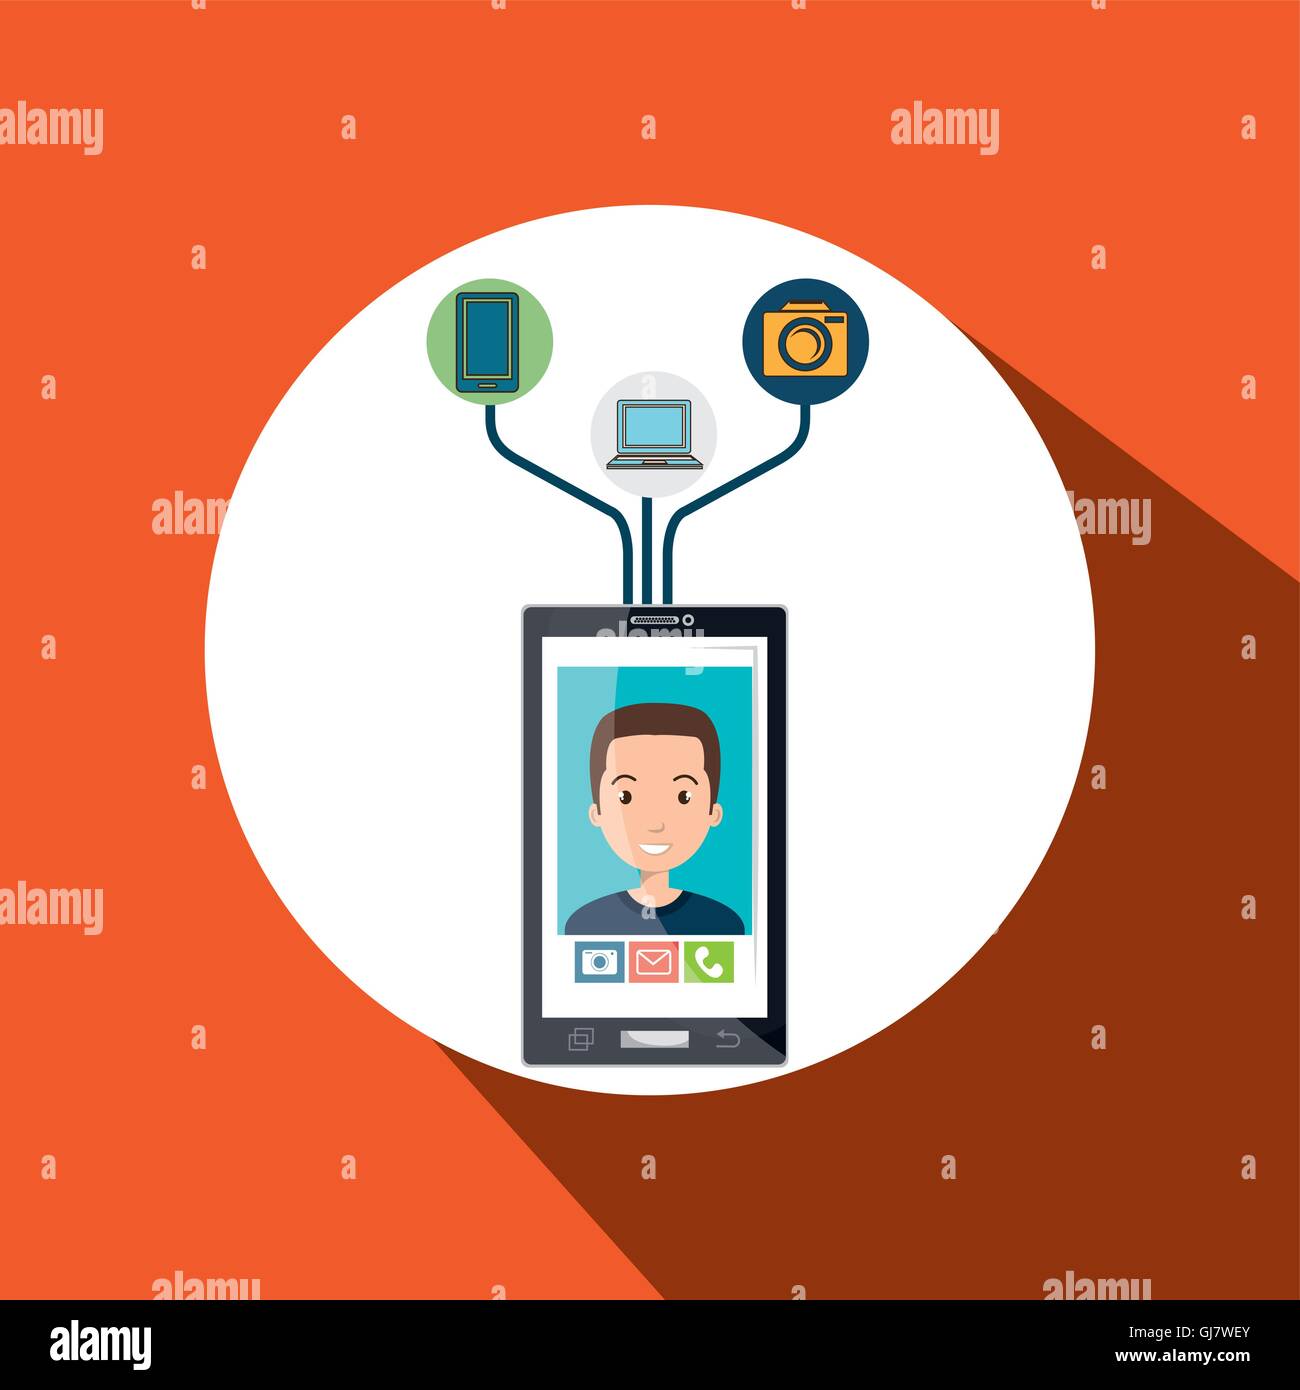 smartphone wifi service connection Stock Vector